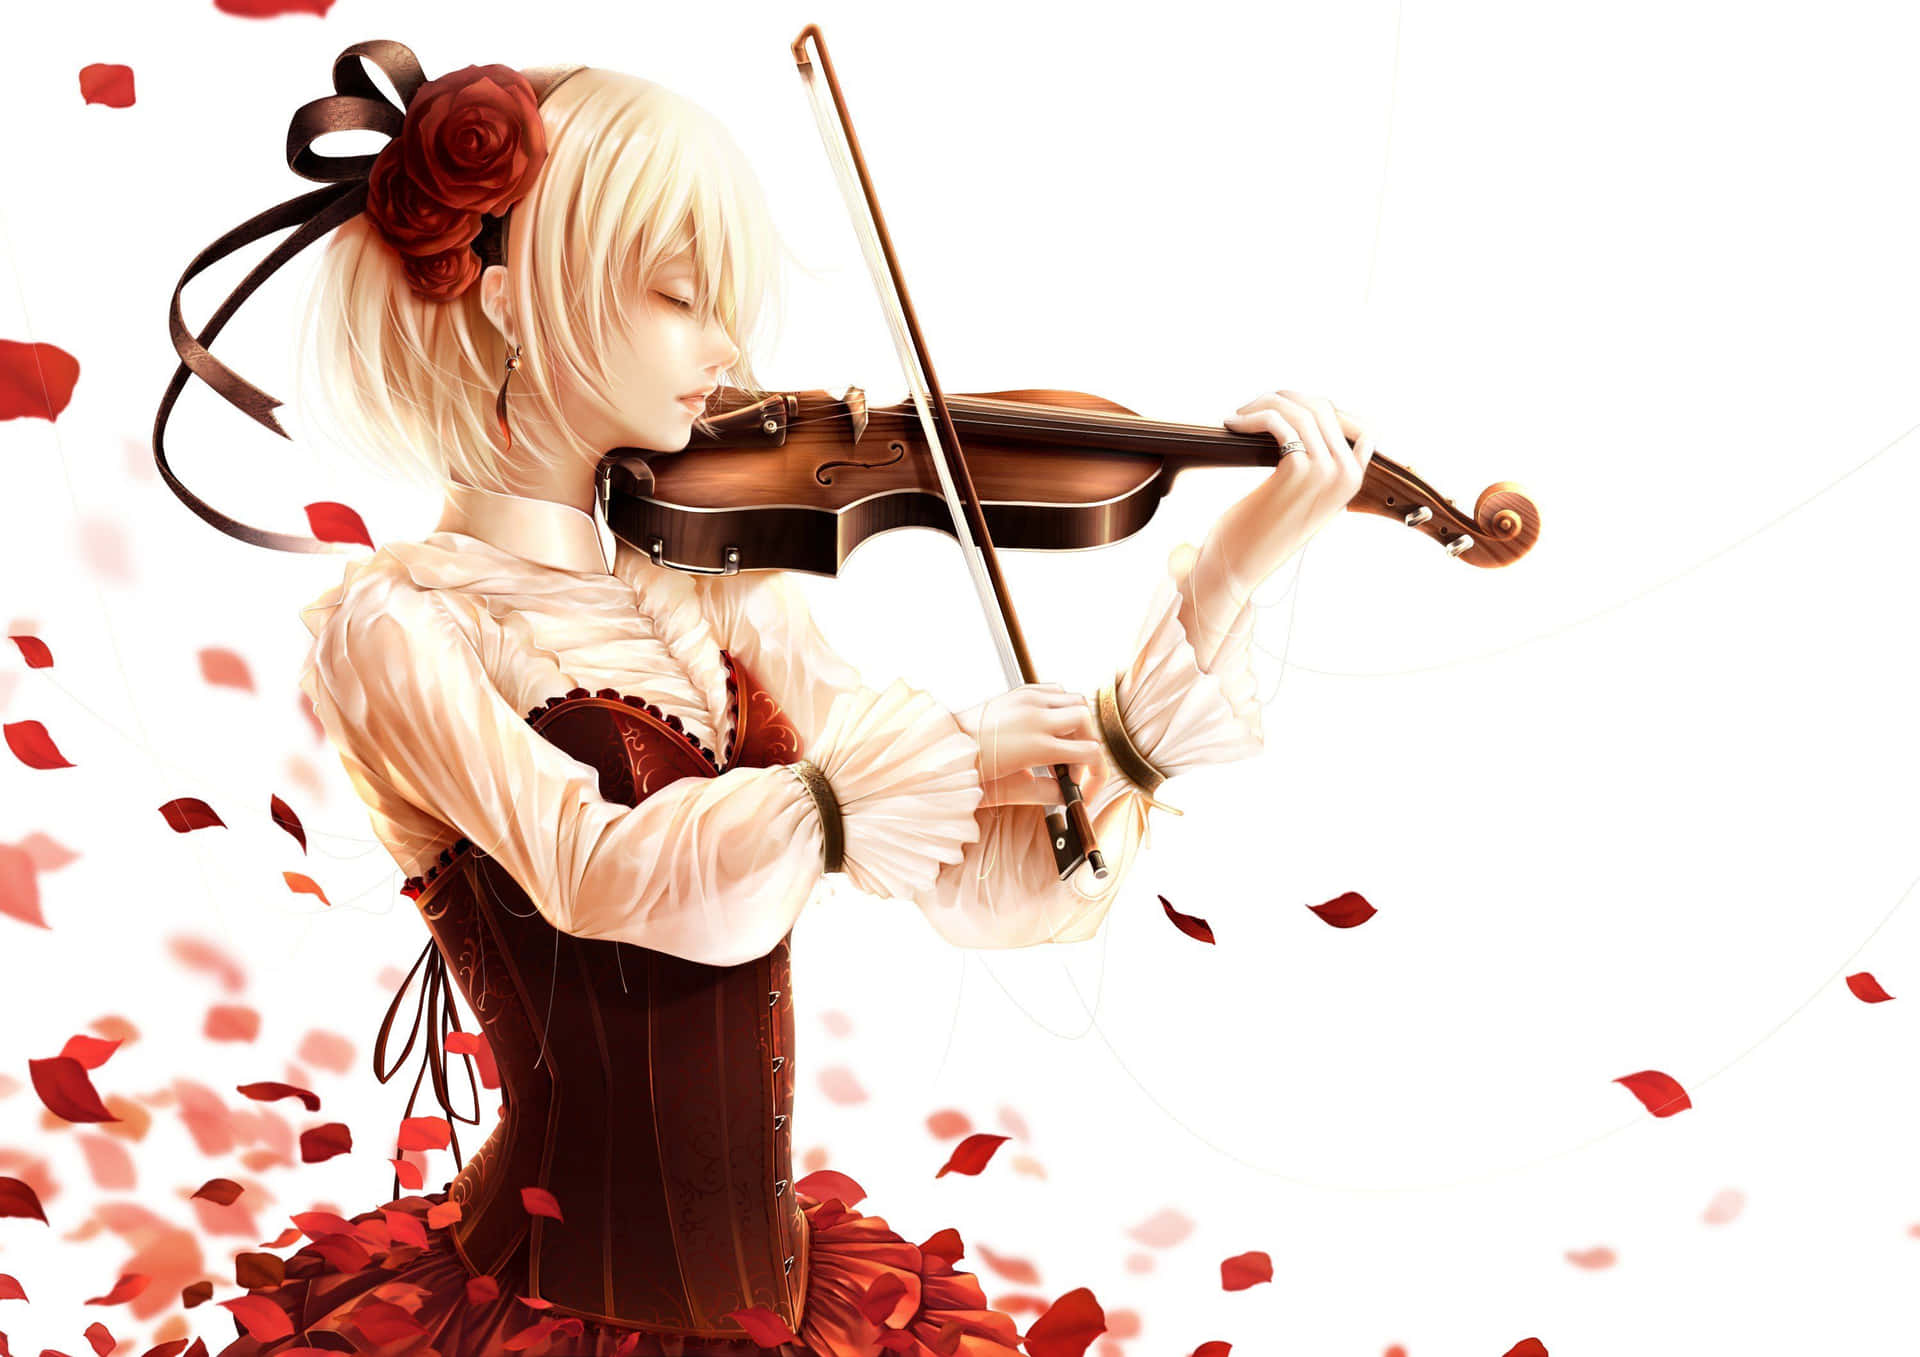 Anime Rose Girl Playing Violin Picture